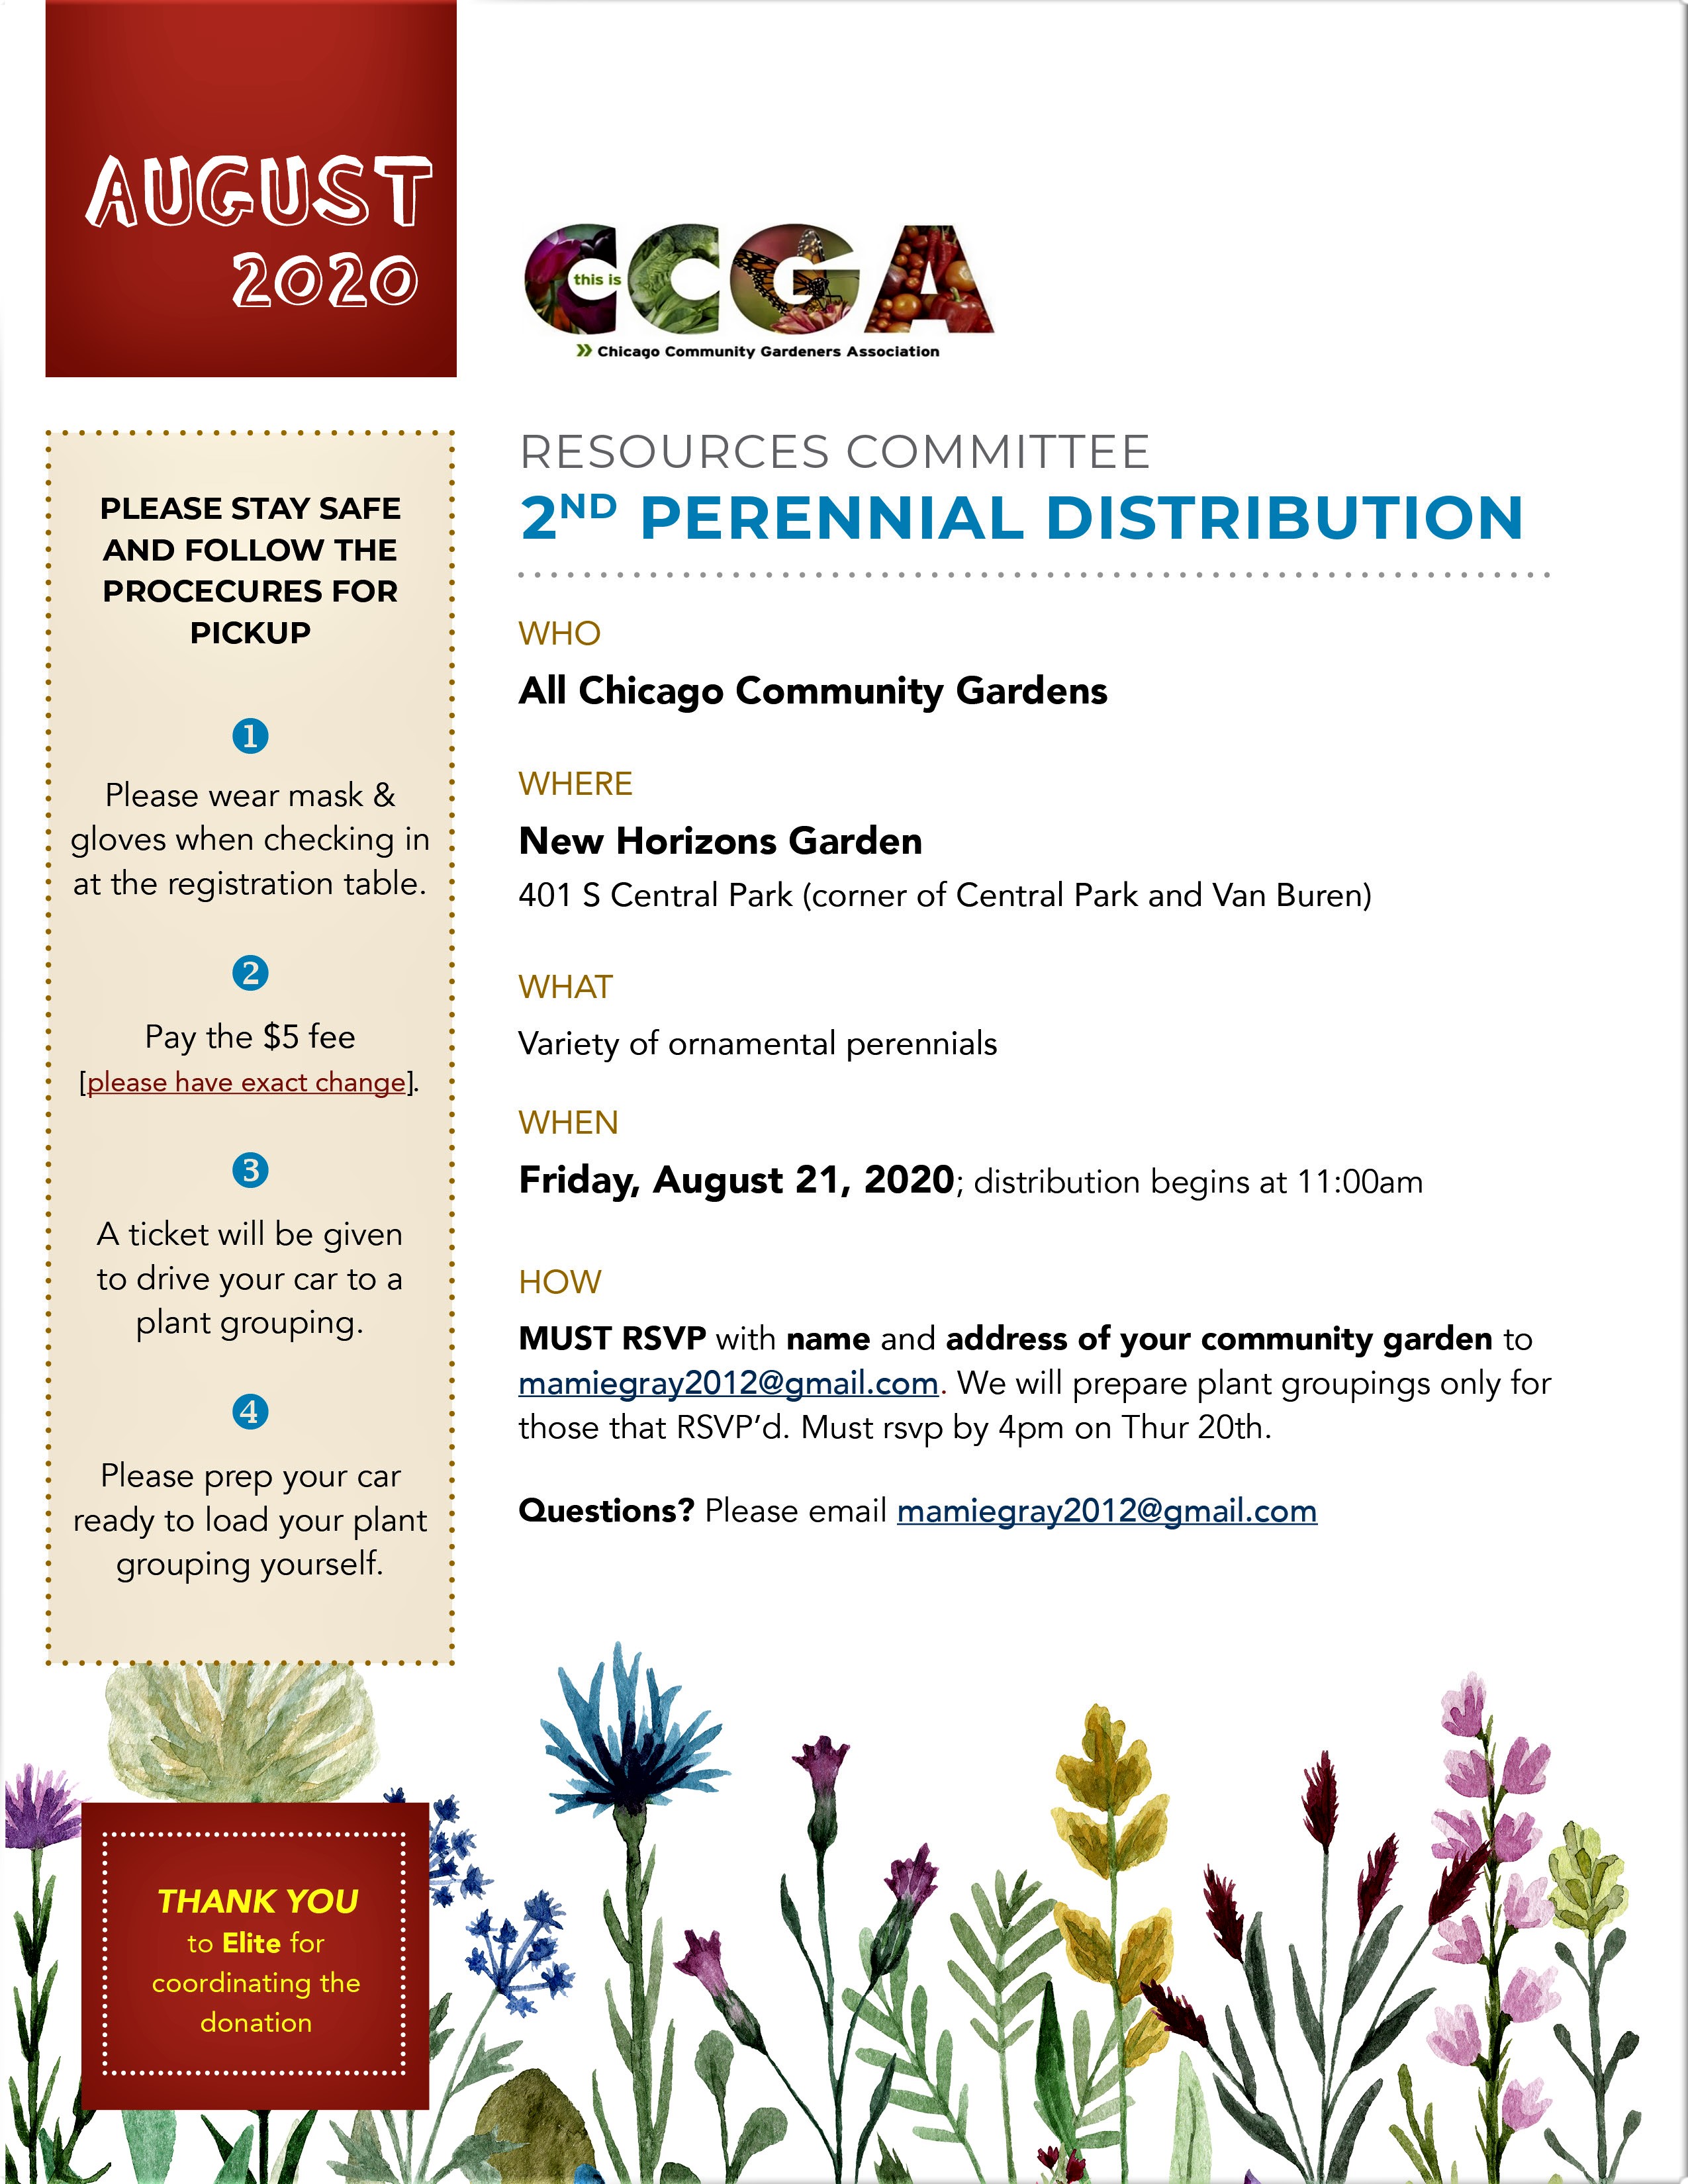 CCGA Resources Committee Announces its 2nd PERENNIAL DISTRIBUTION of 2020